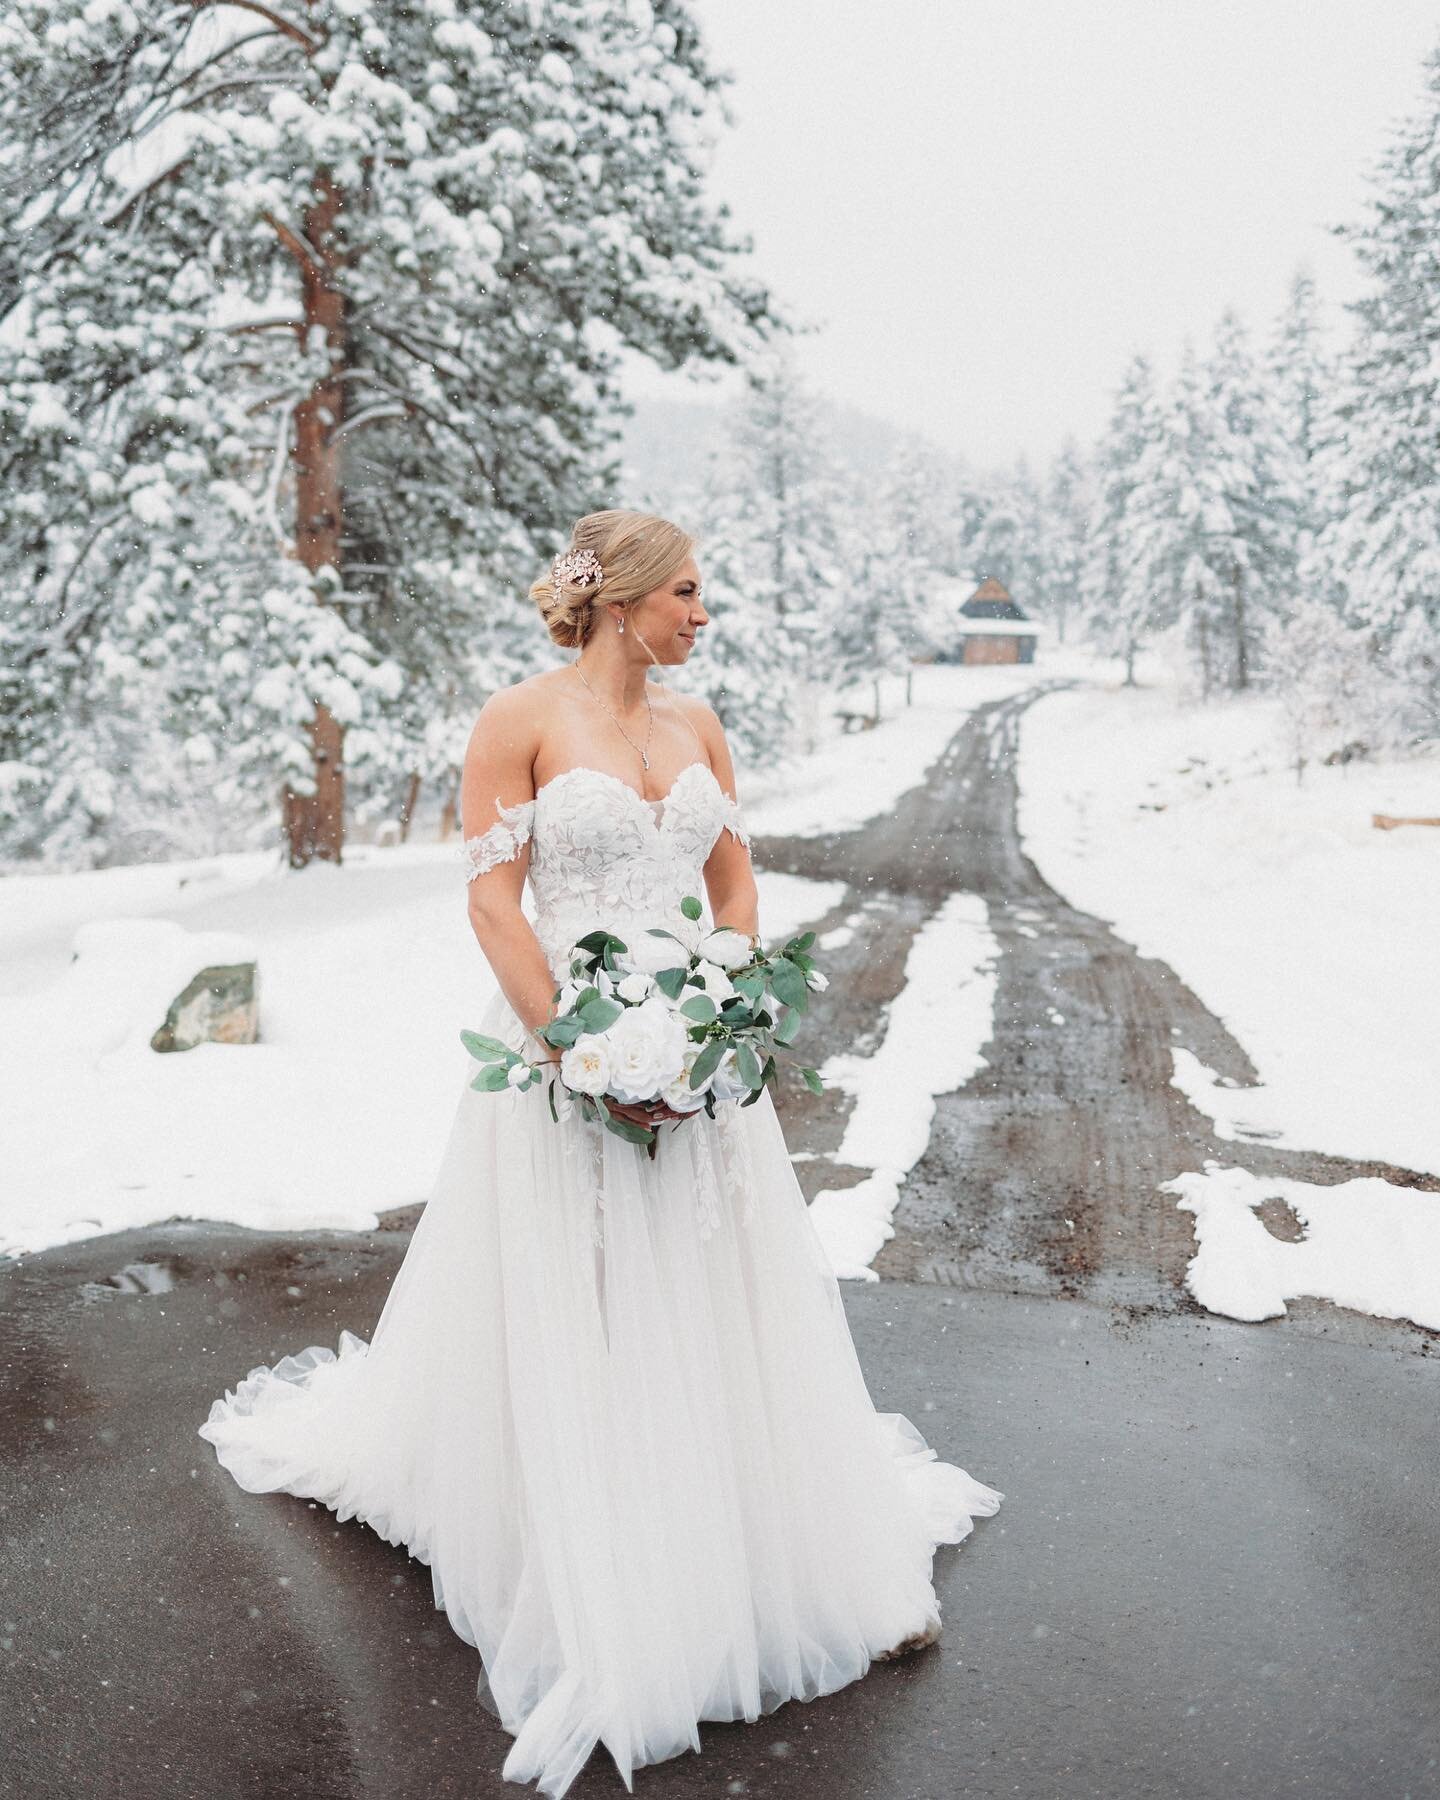 Darby and Drew had the best winter wonderland wedding at the woodlands. I truly felt God between these two so much yesterday. Can&rsquo;t wait to share more!!!

The vendor team:
Planner : @cheersweddingplanning
Venue : @woodlandscolorado
Photographer